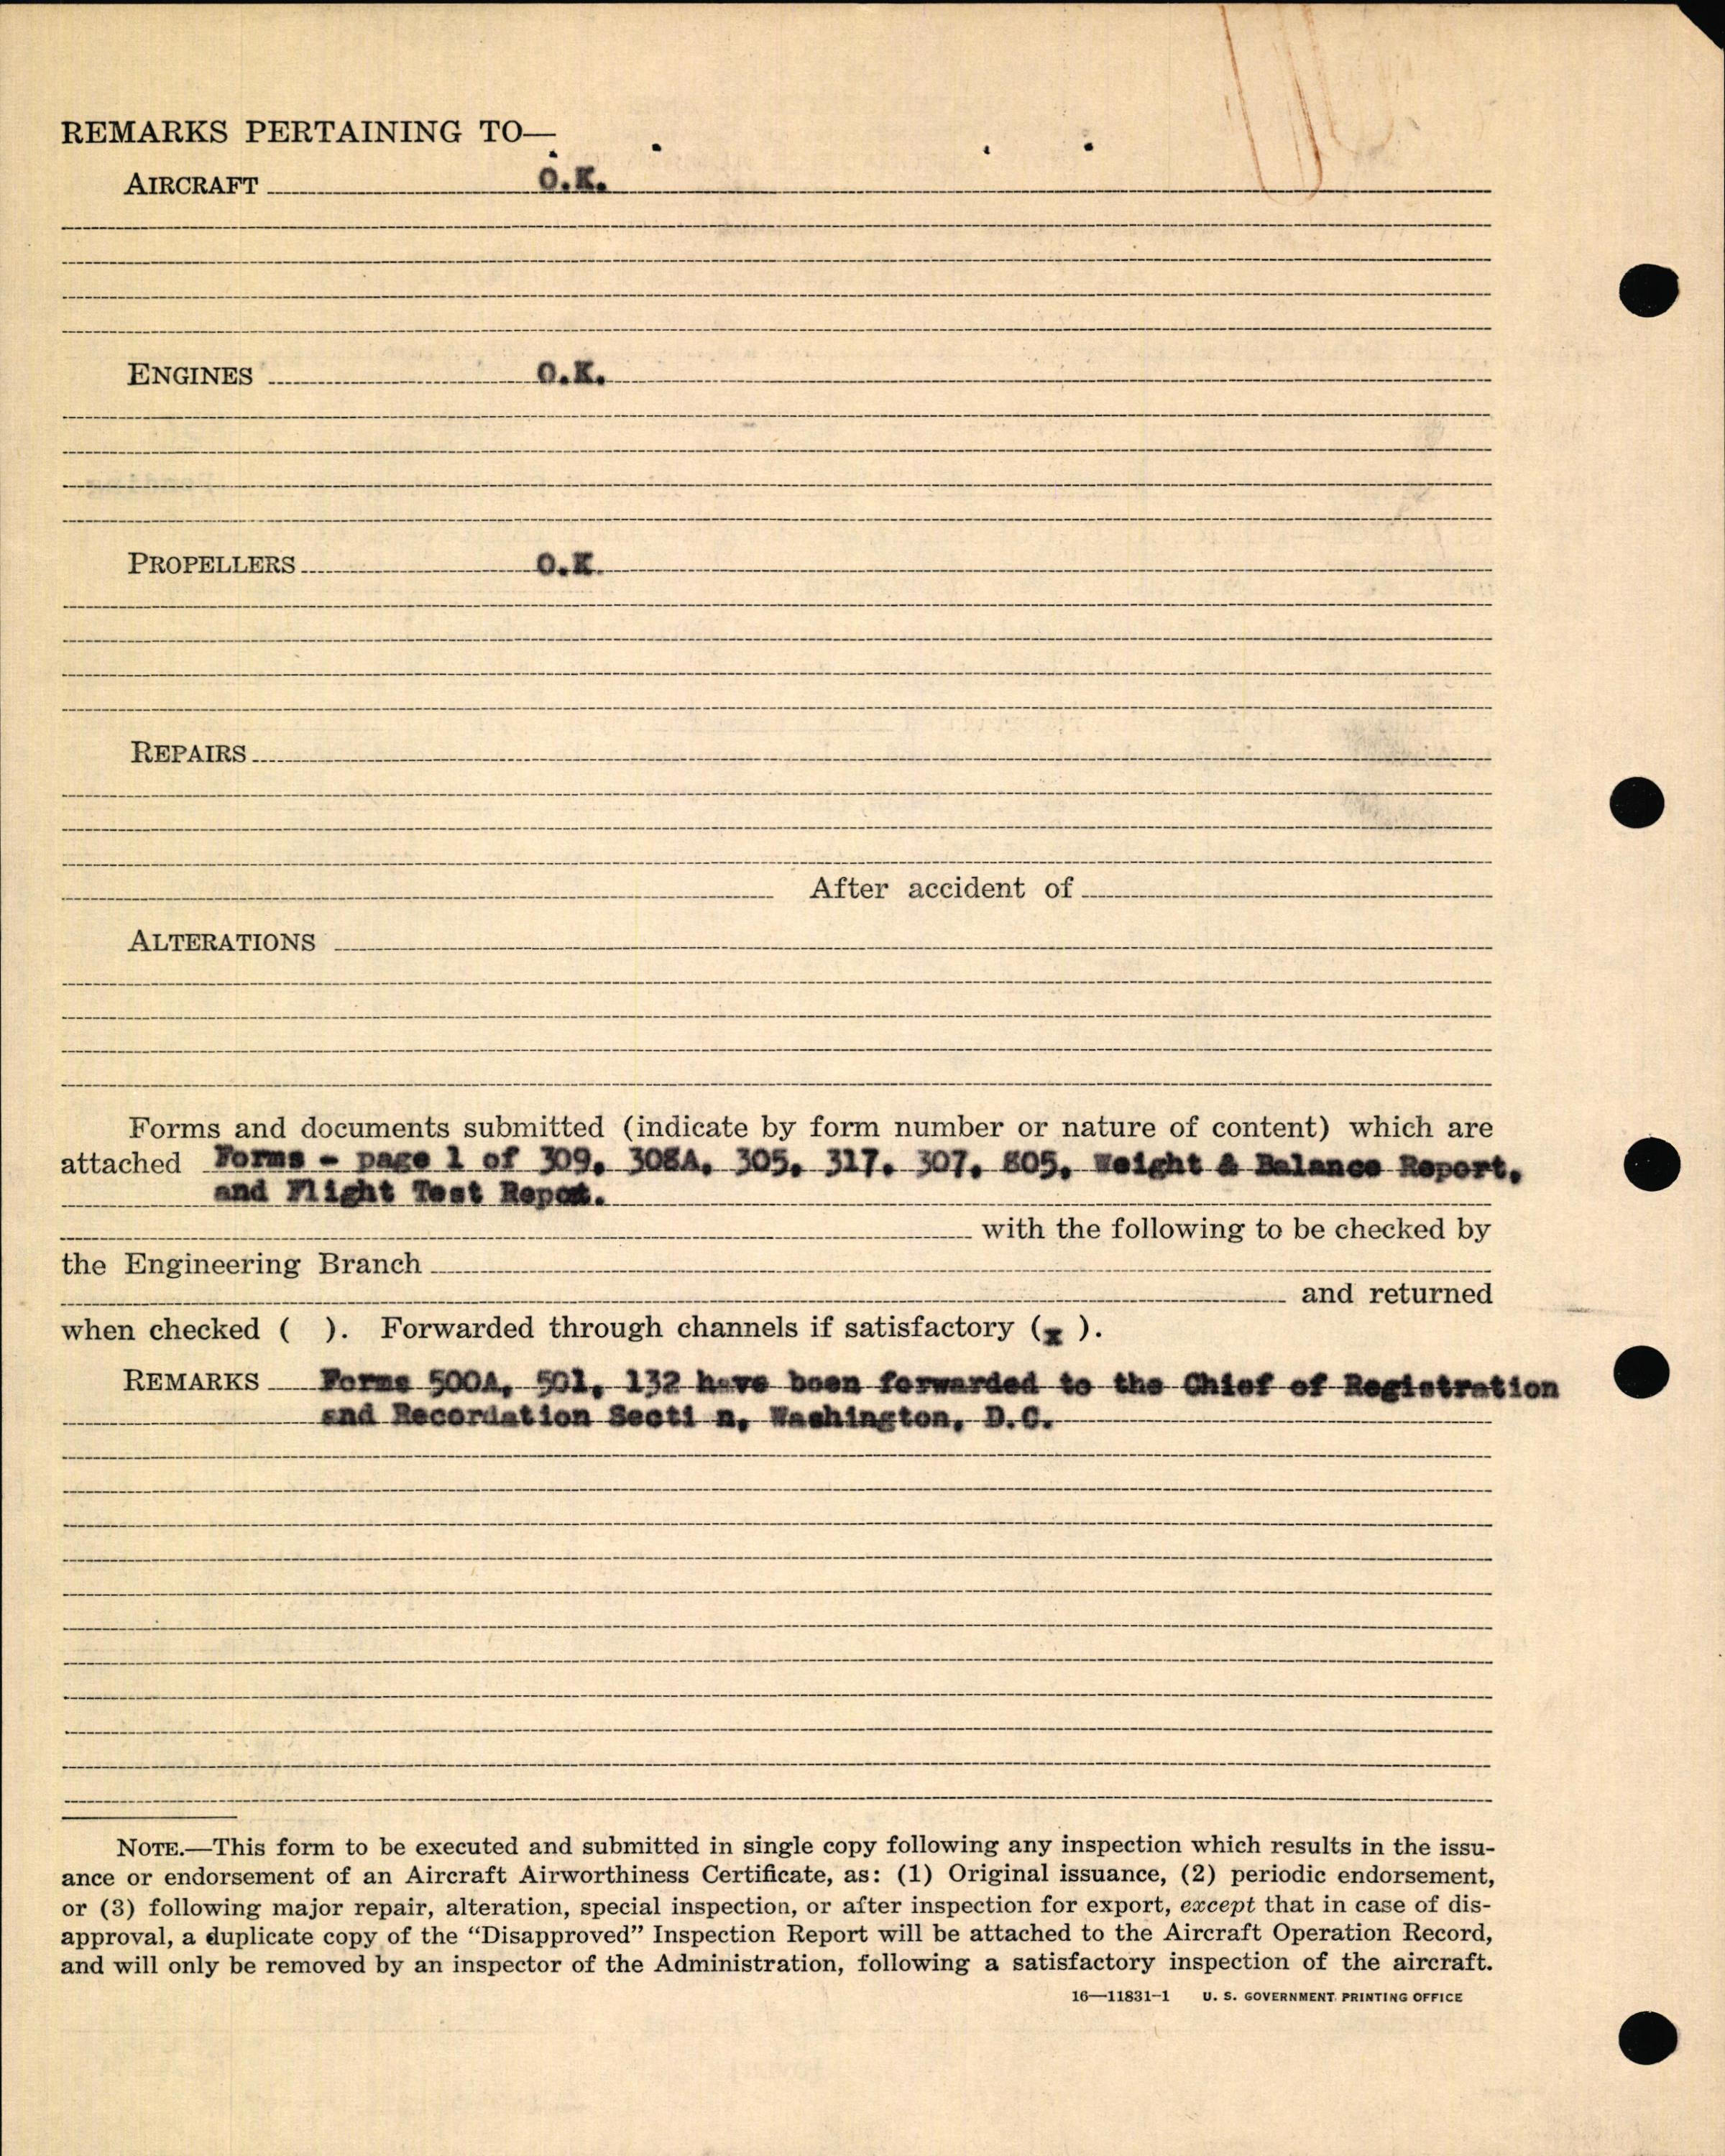 Sample page 6 from AirCorps Library document: Technical Information for Serial Number 80